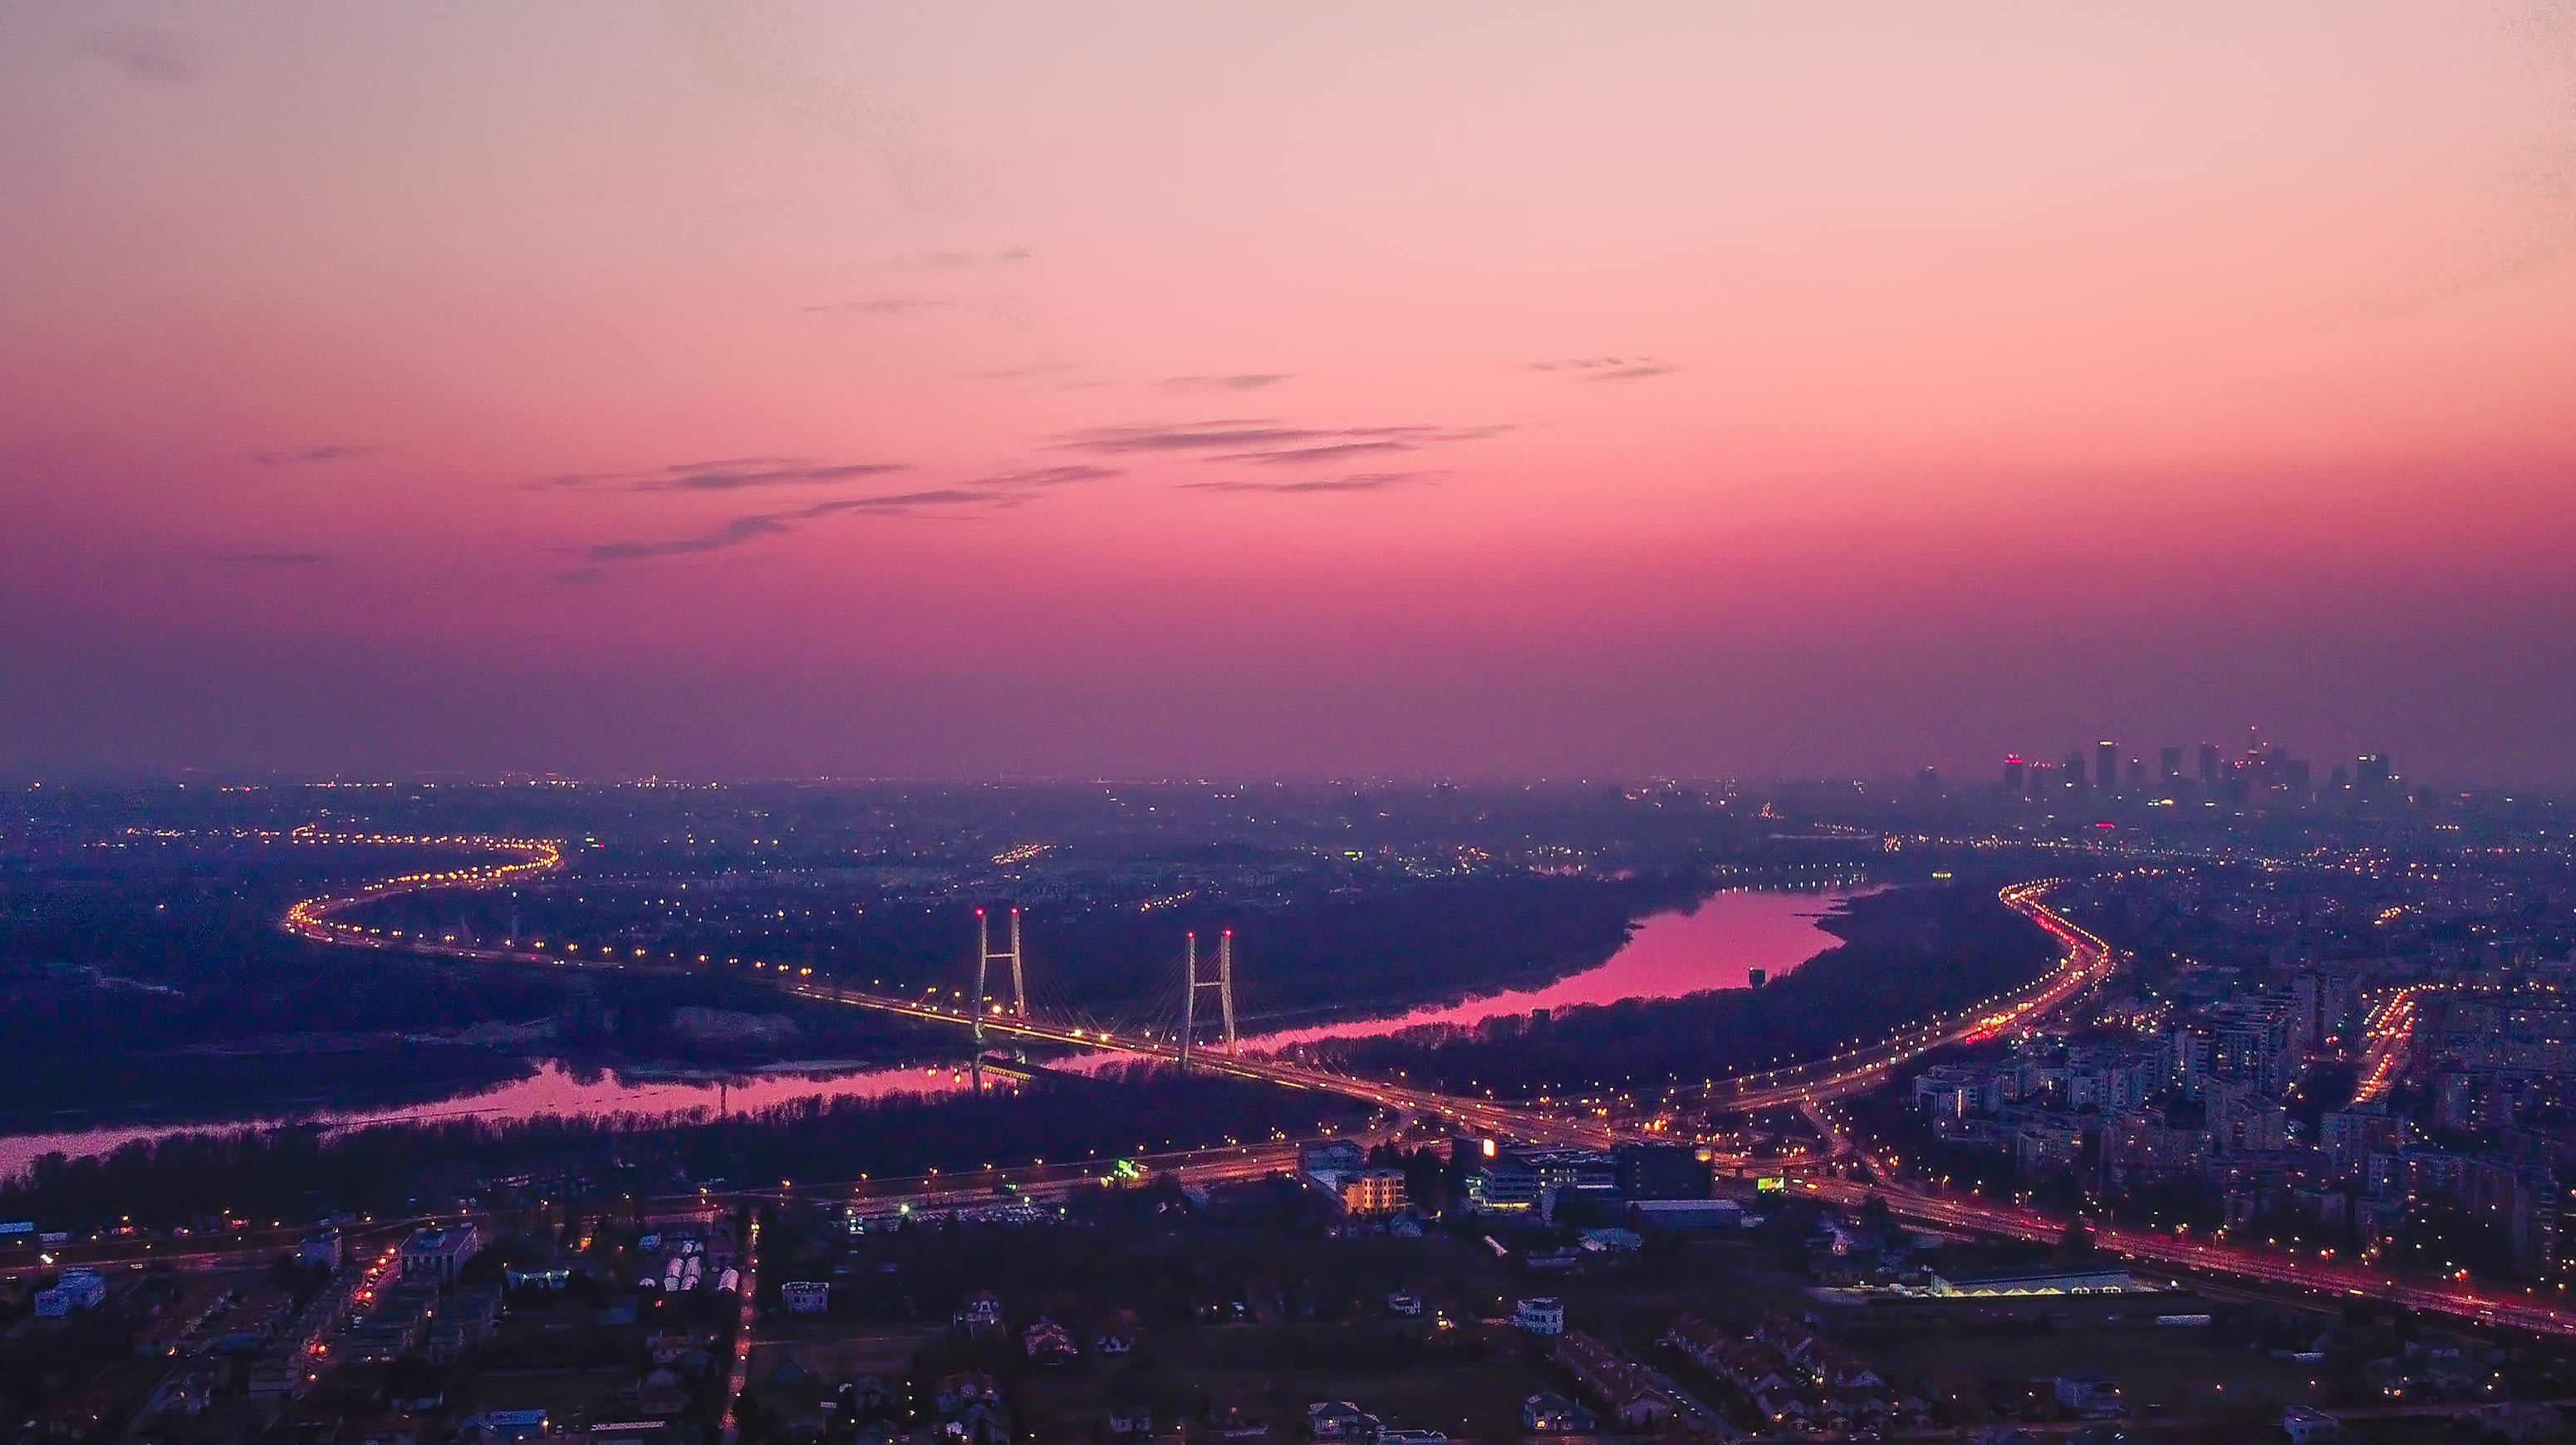 city skyline during dusk, with pink light glowing over a river